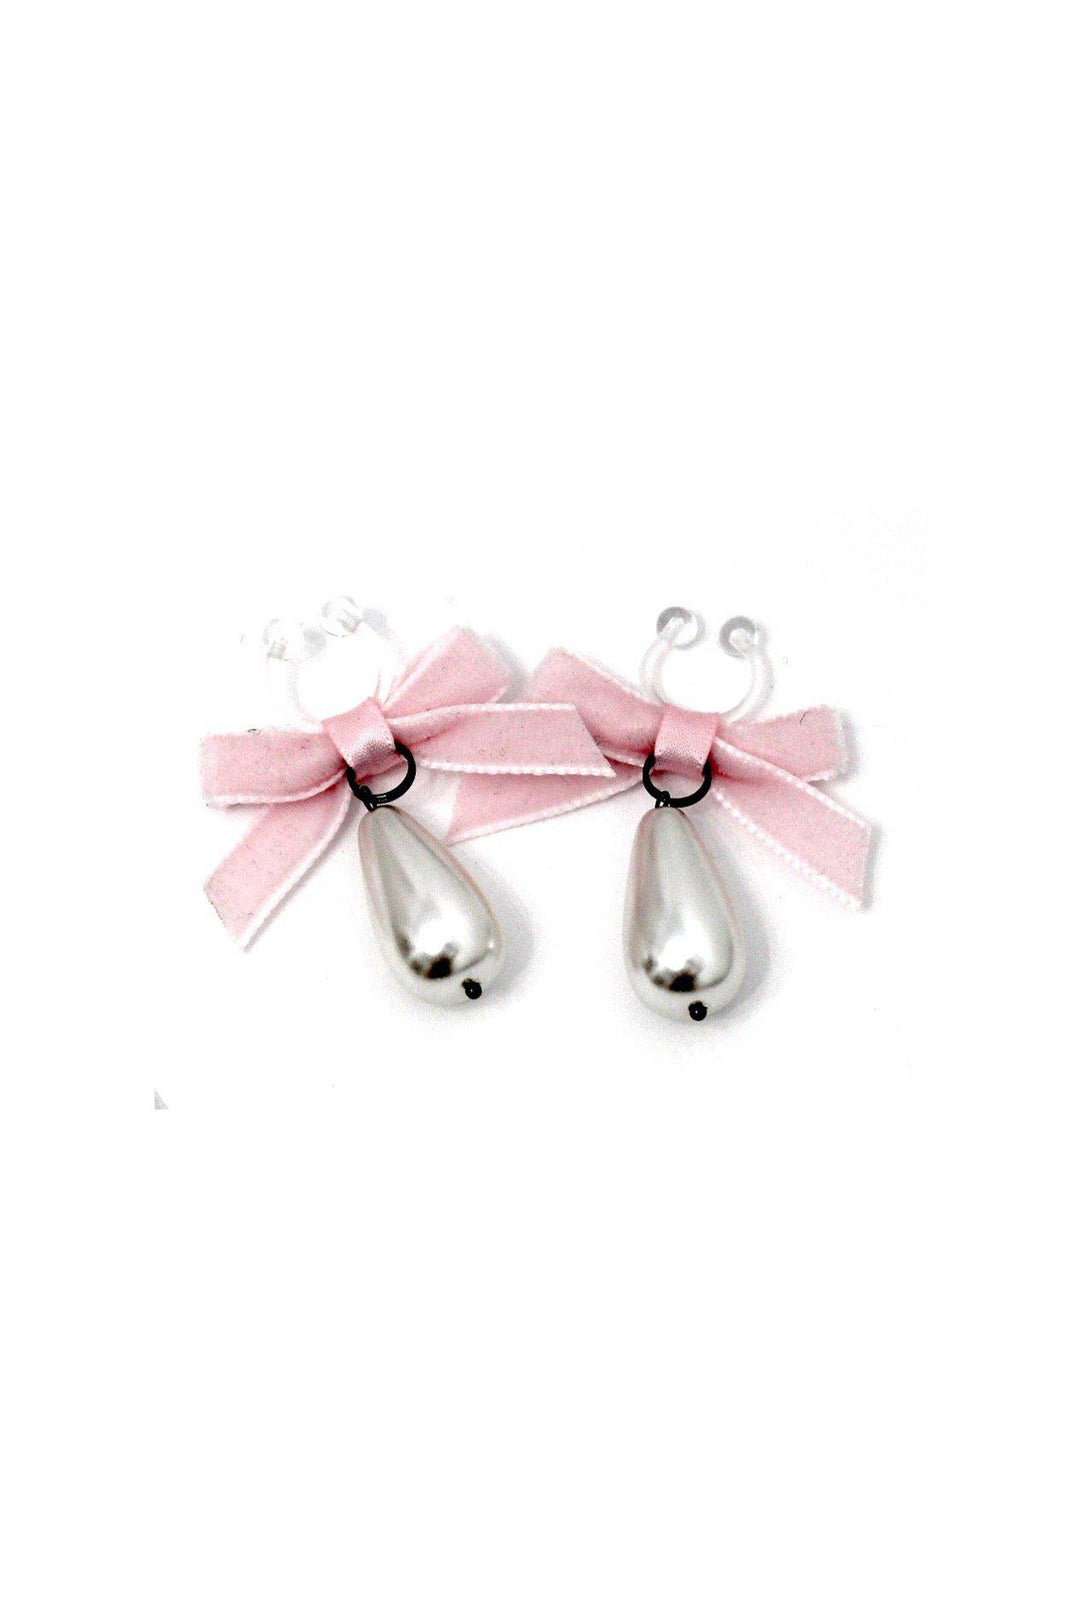 Marie Antoinette Niptyes-Body Jewelry-Tyes By Tara-Pink-O/S-SEXYSHOES.COM